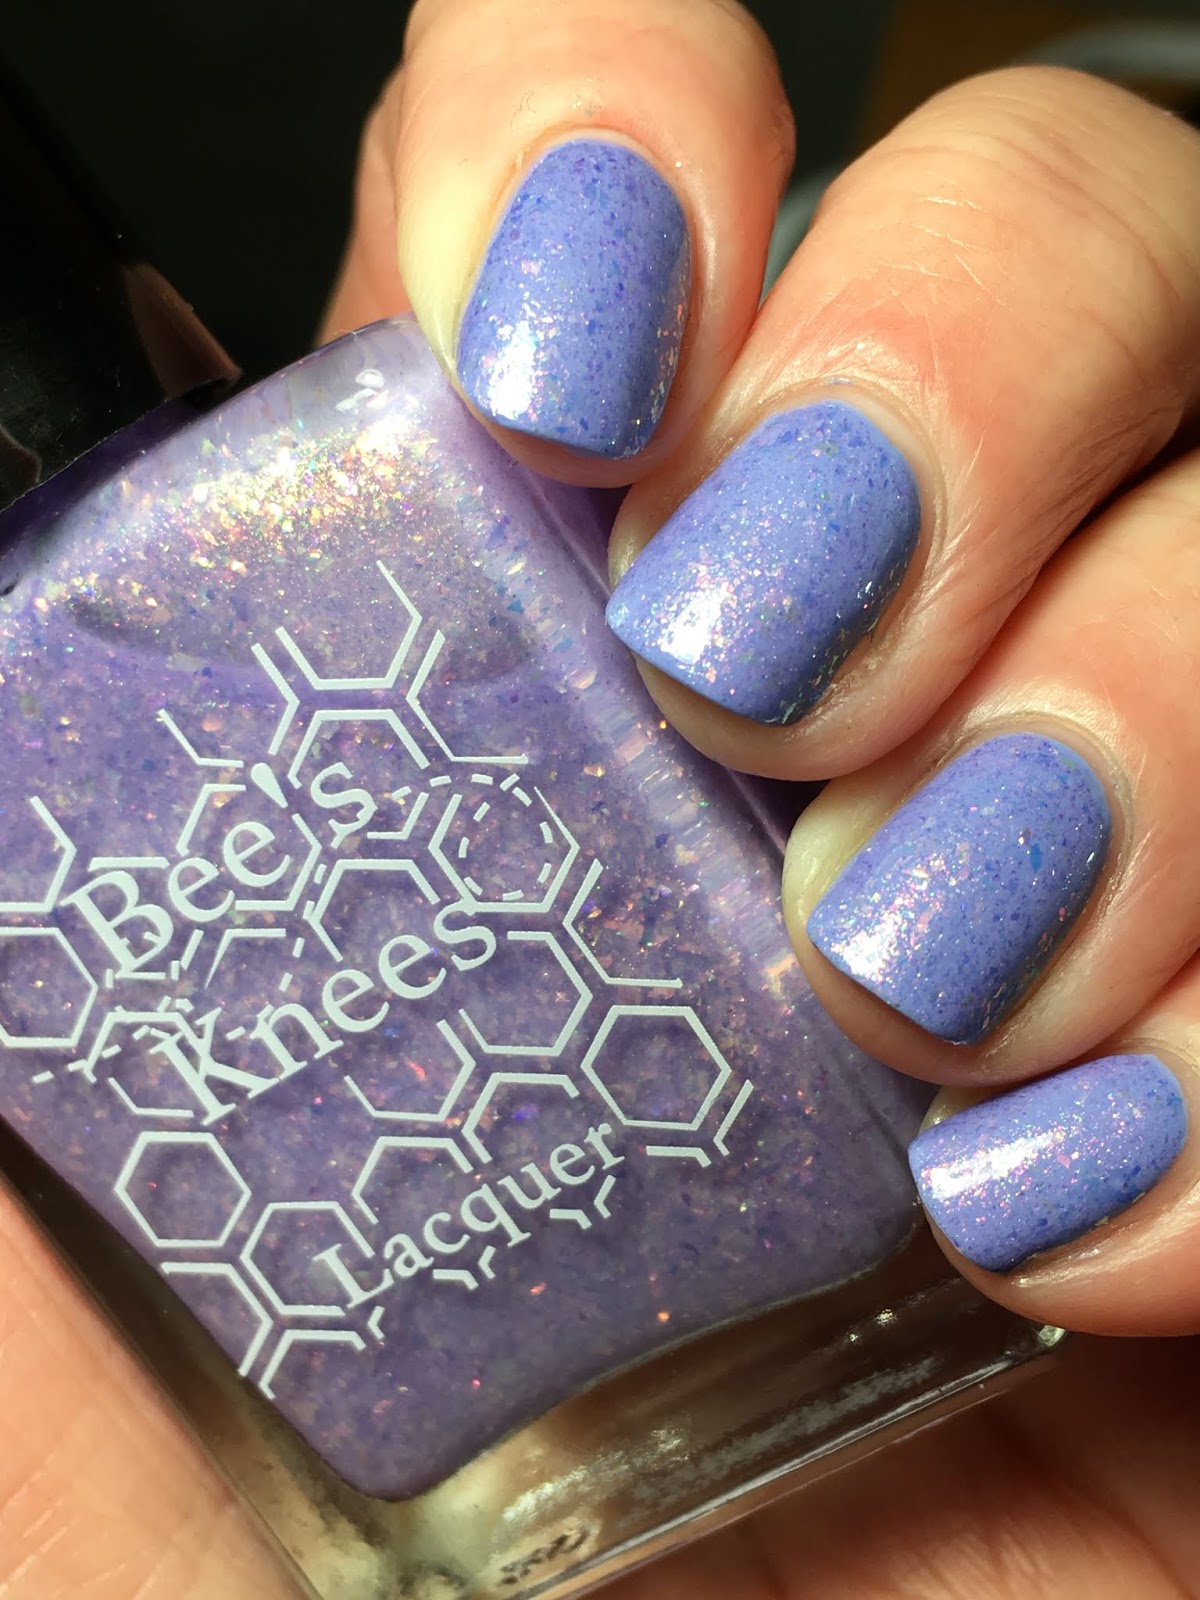 Canadian Nail Fanatic: Bee's Knees Lacquer A Better Strength